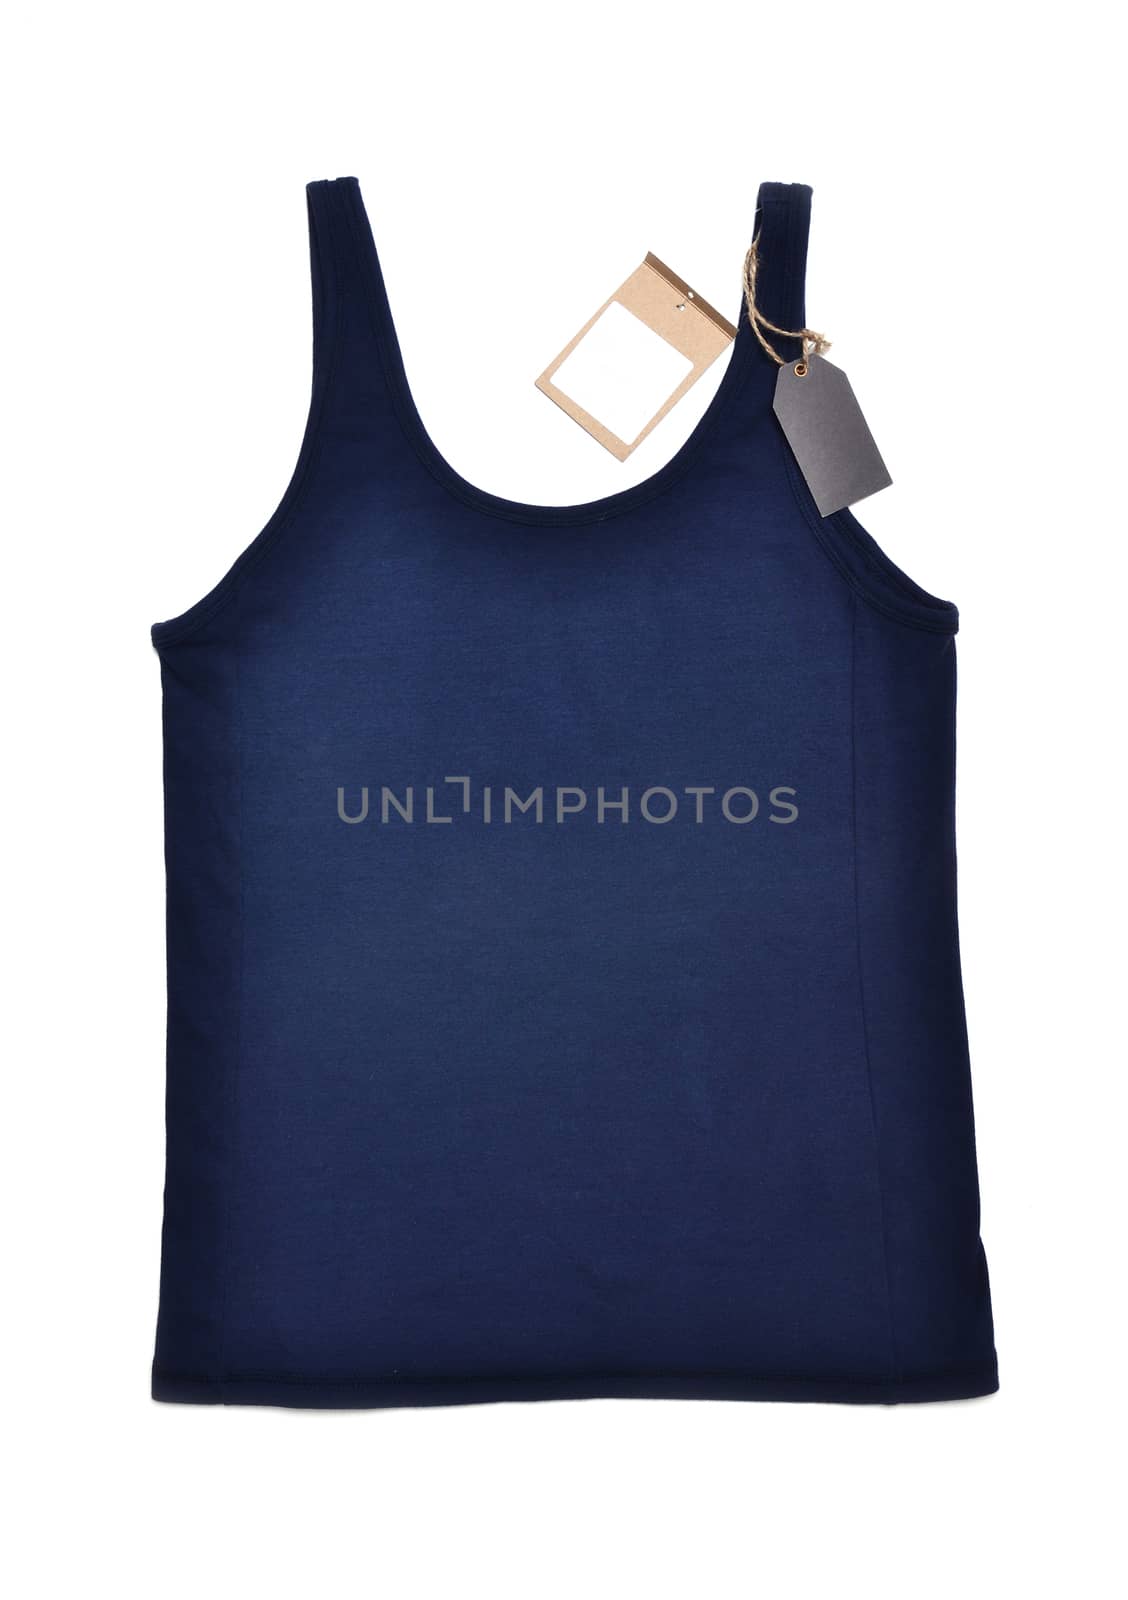 undershirt with price tag on white background